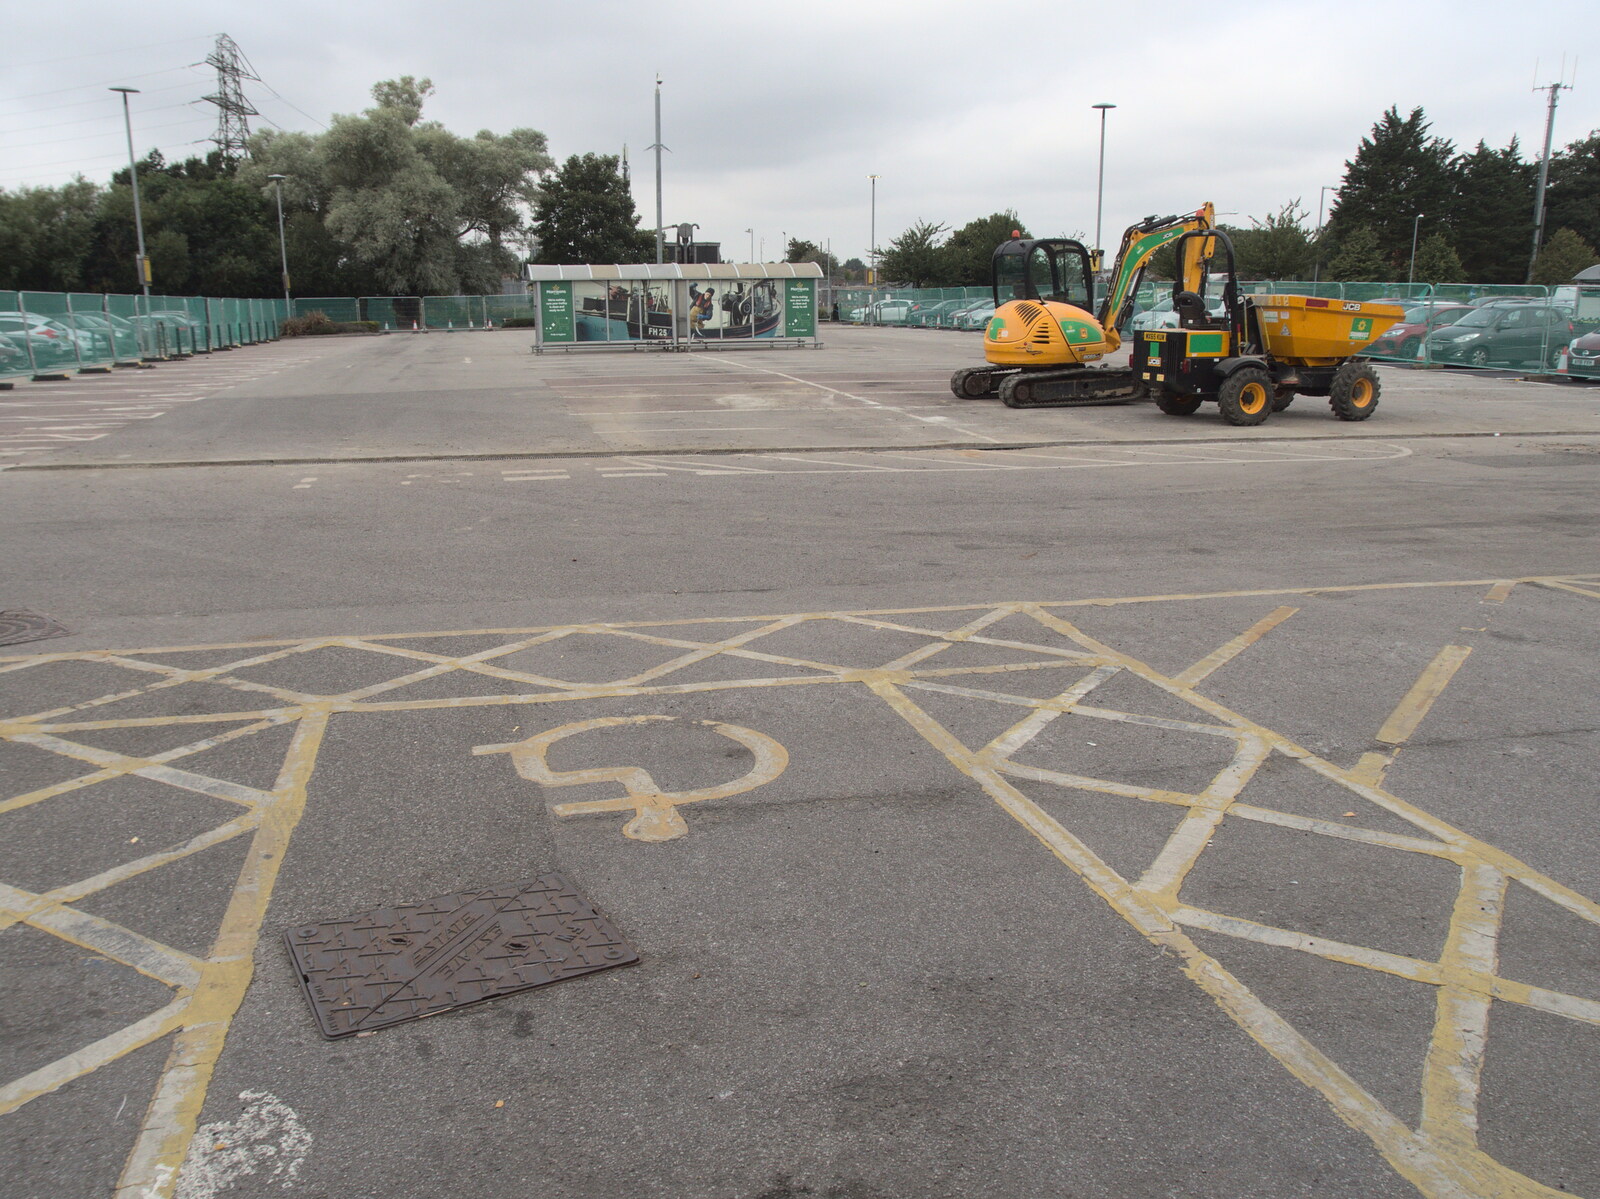 Morrison's car park is closed for resurfacing from A Few Hours at the Fair, Fair Green, Diss, Norfolk - 5th September 2021